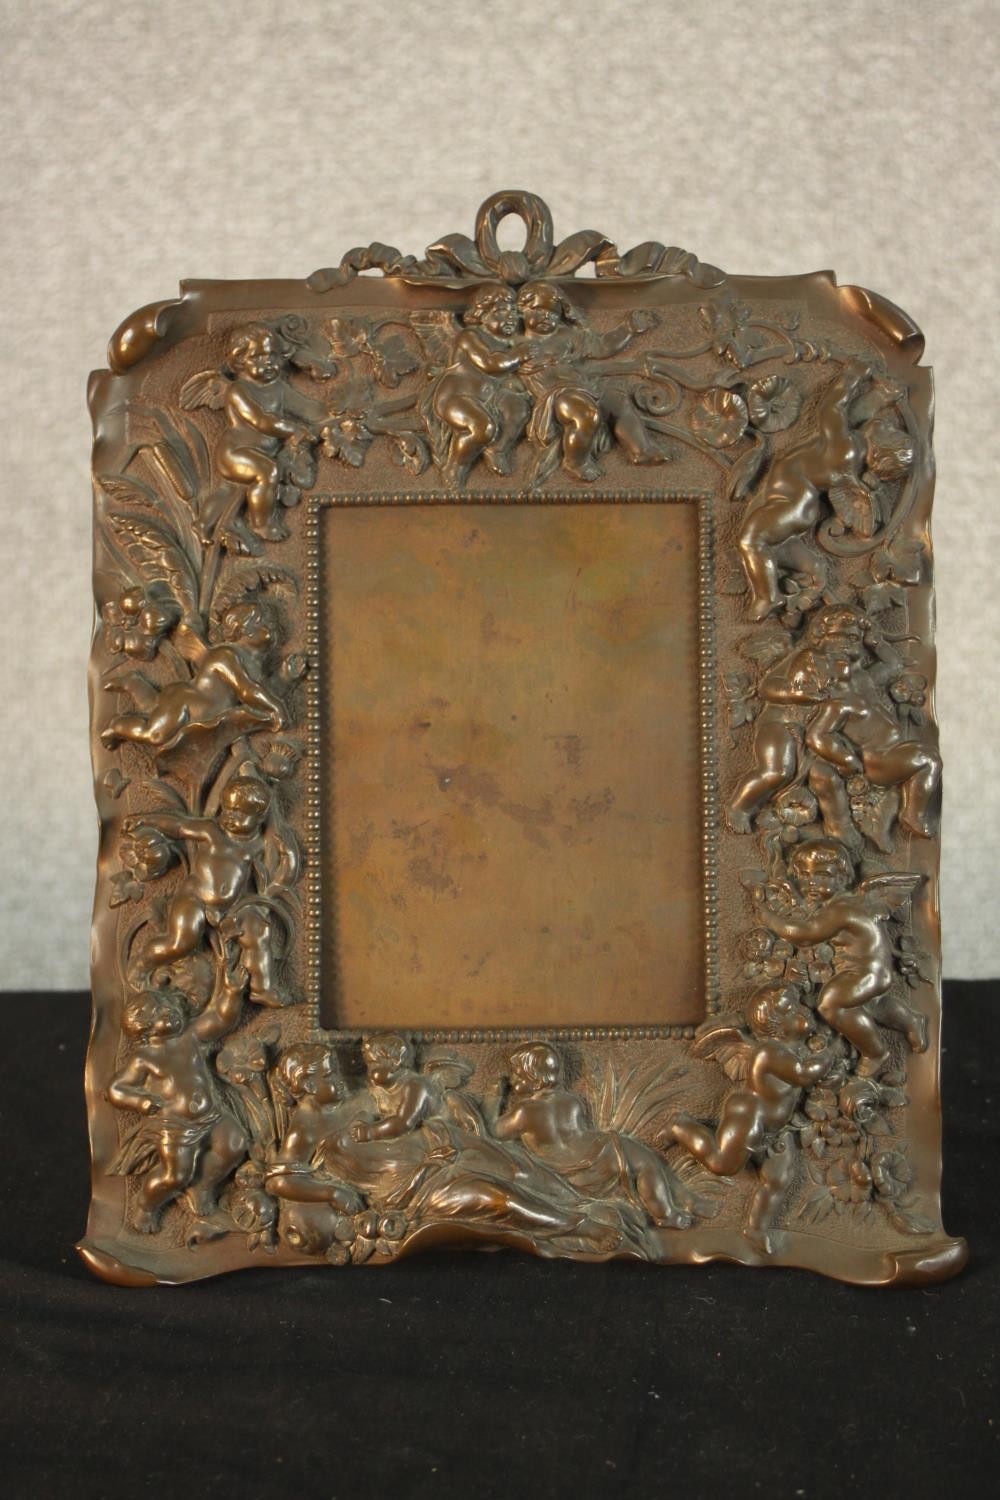 A late 19th/early 20th, possibly Italian cast bronze easel picture frame, with fiigural and putti